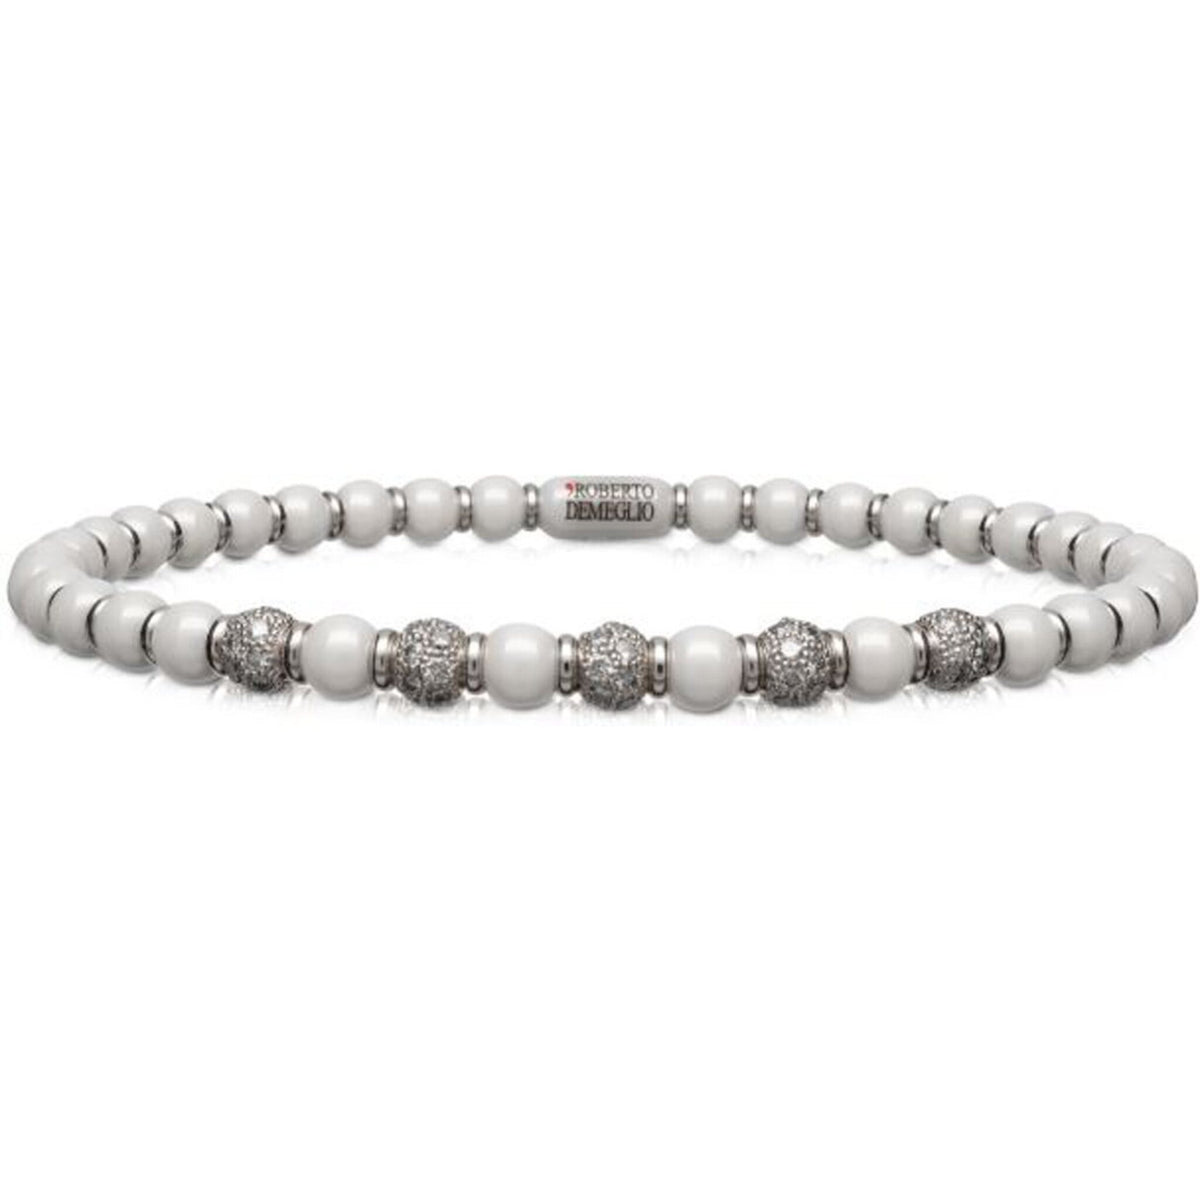 Roberto Demeglio - 4mm White Ceramic Stretch Bracelet With 5 Diamond Beads and Gold Rodells in 18K White Gold